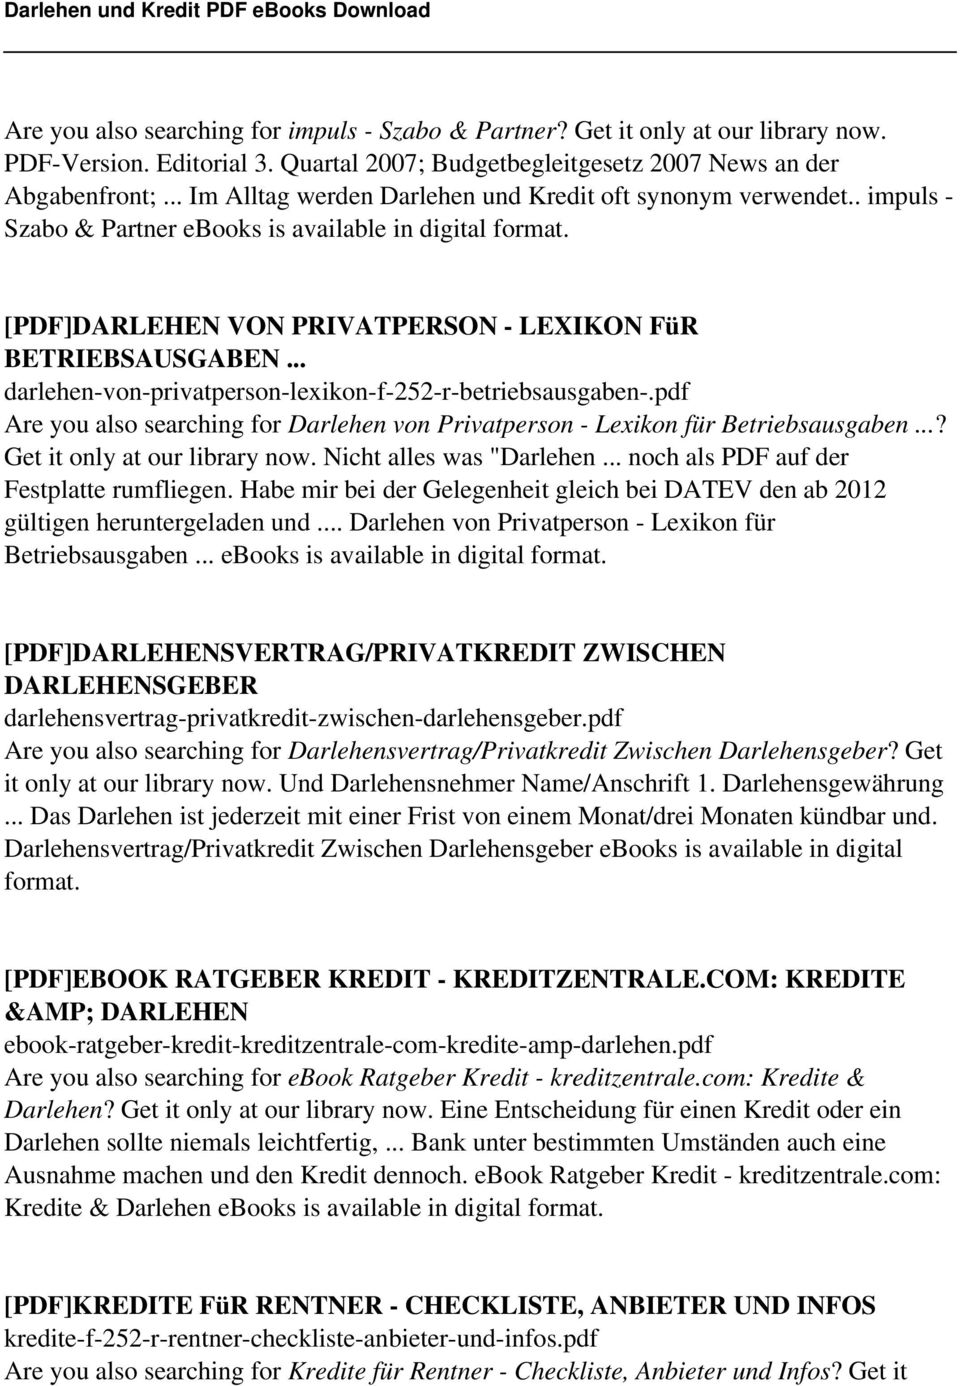 .. darlehen-von-privatperson-lexikon-f-252-r-betriebsausgaben-.pdf Are you also searching for Darlehen von Privatperson - Lexikon für Betriebsausgaben...? Get it only at our library now.